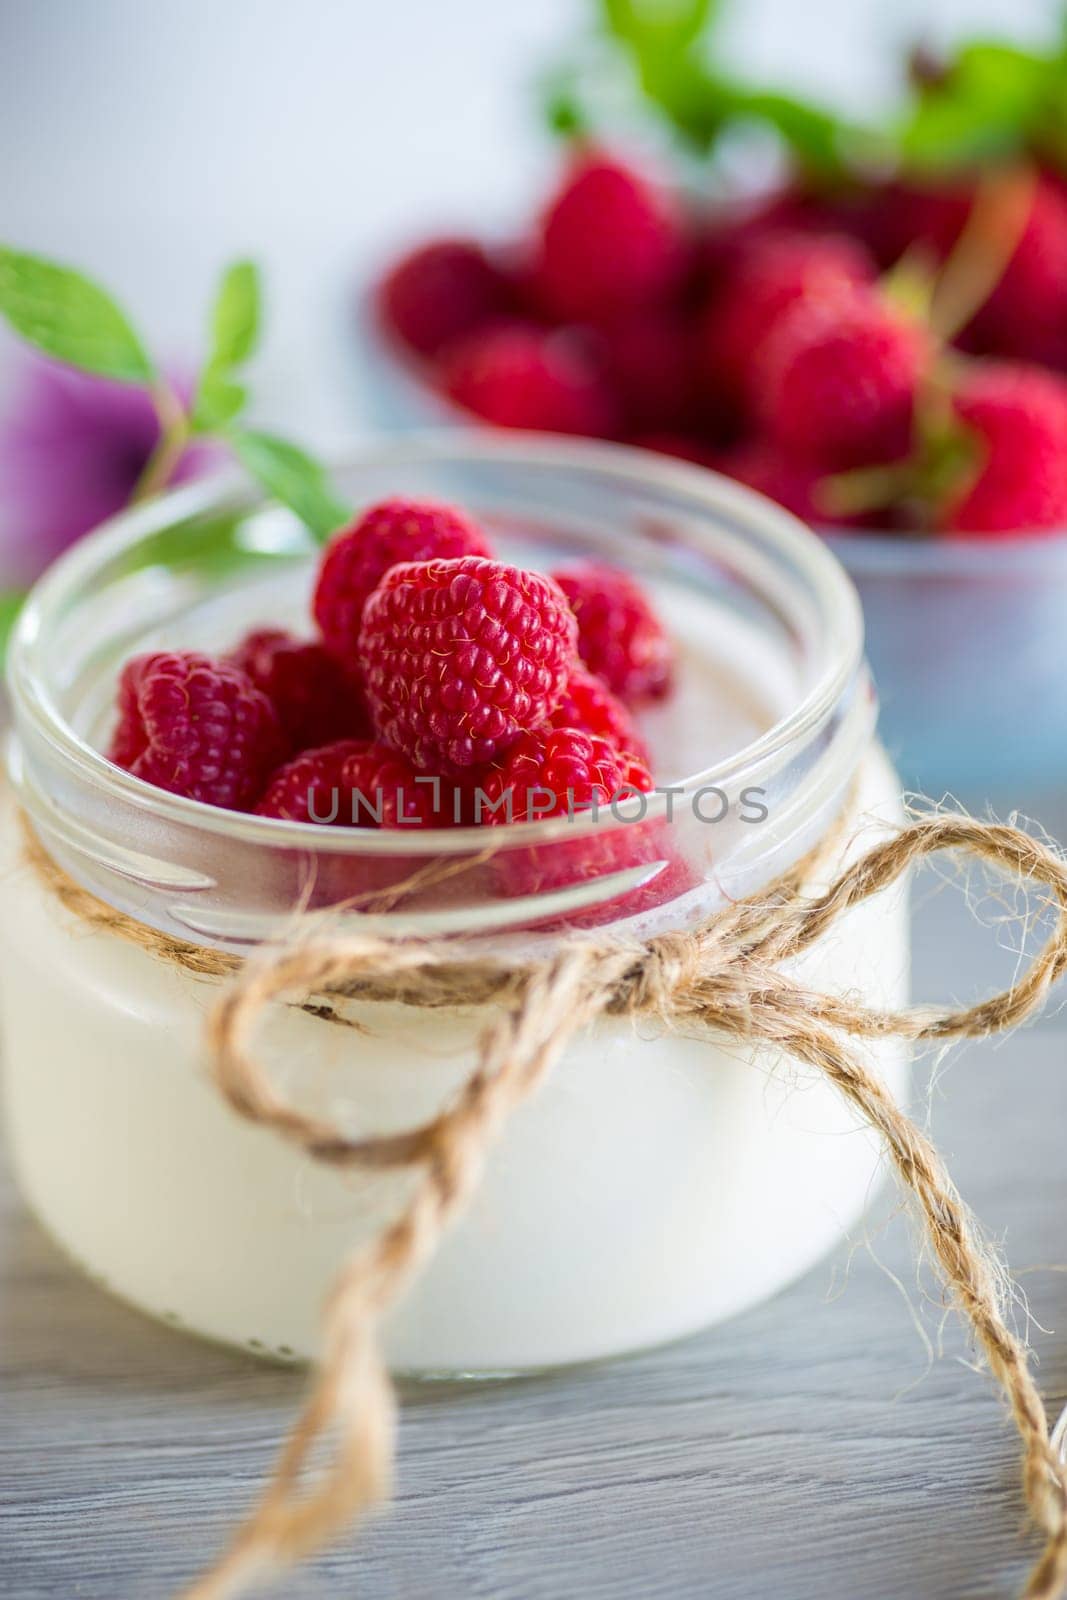 Sweet cooked homemade yogurt with fresh raspberries in a glass jar, on a light wooden table.